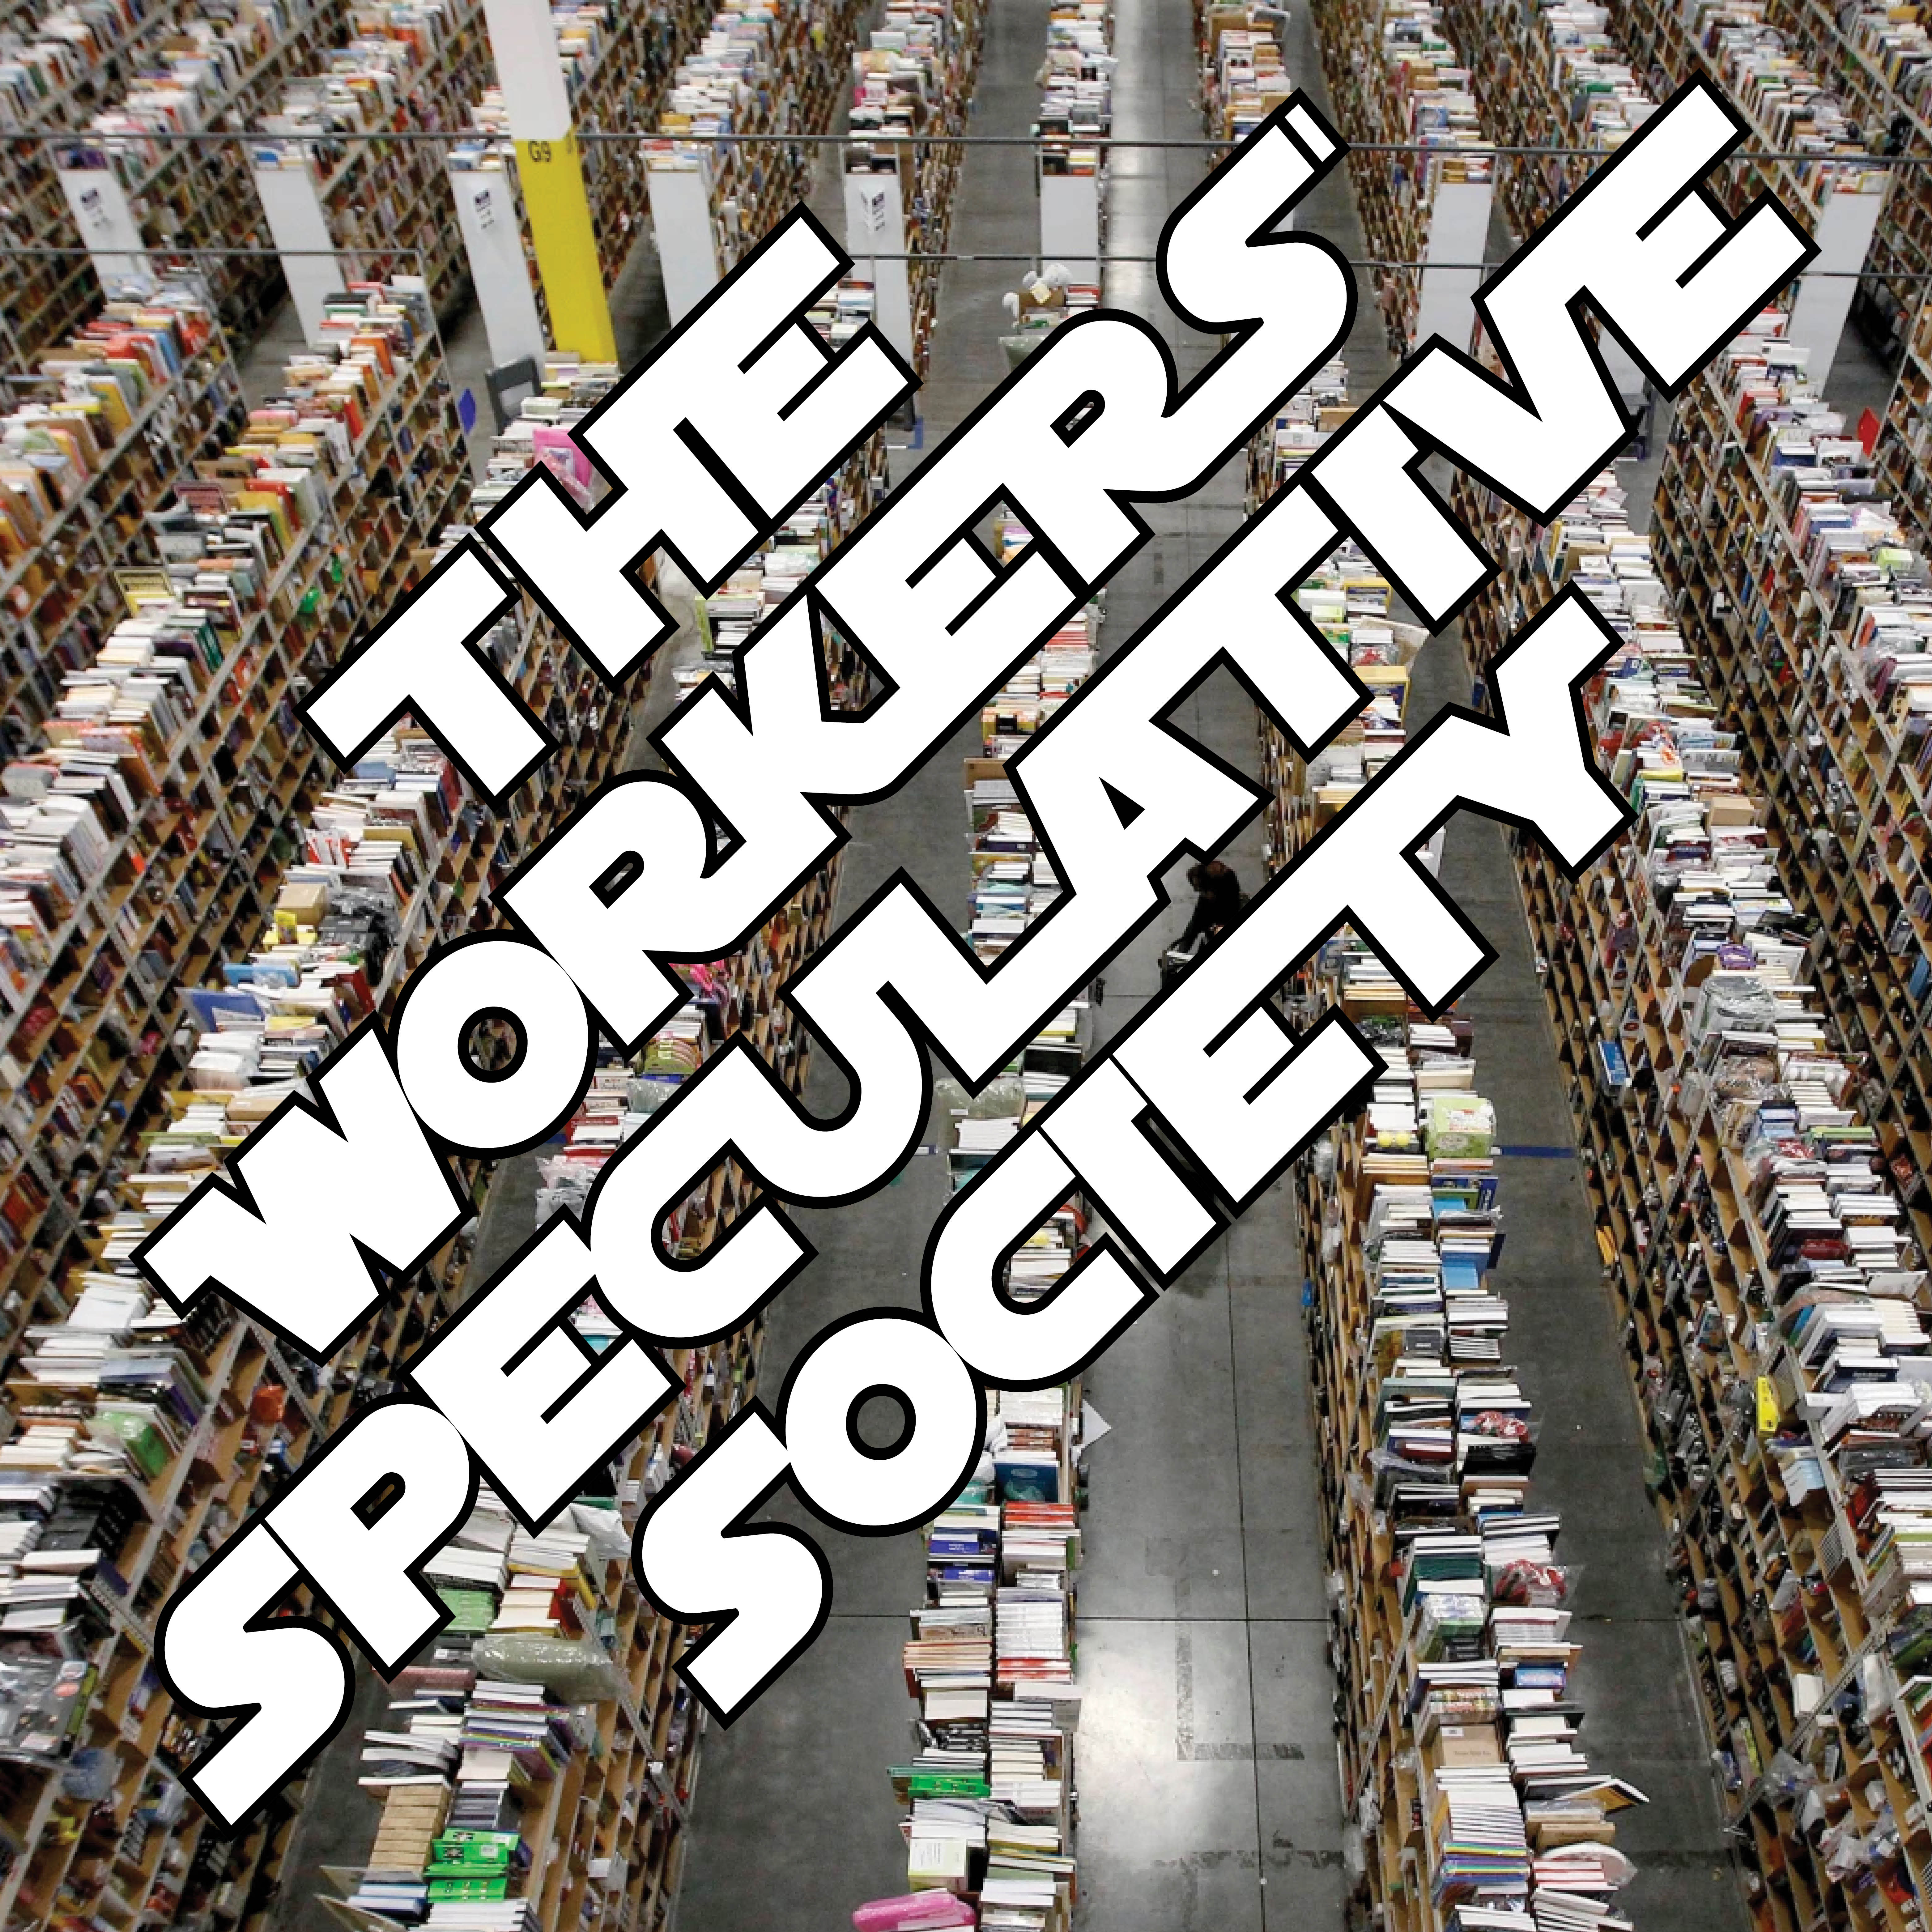 The Workers’ Speculative Society podcast